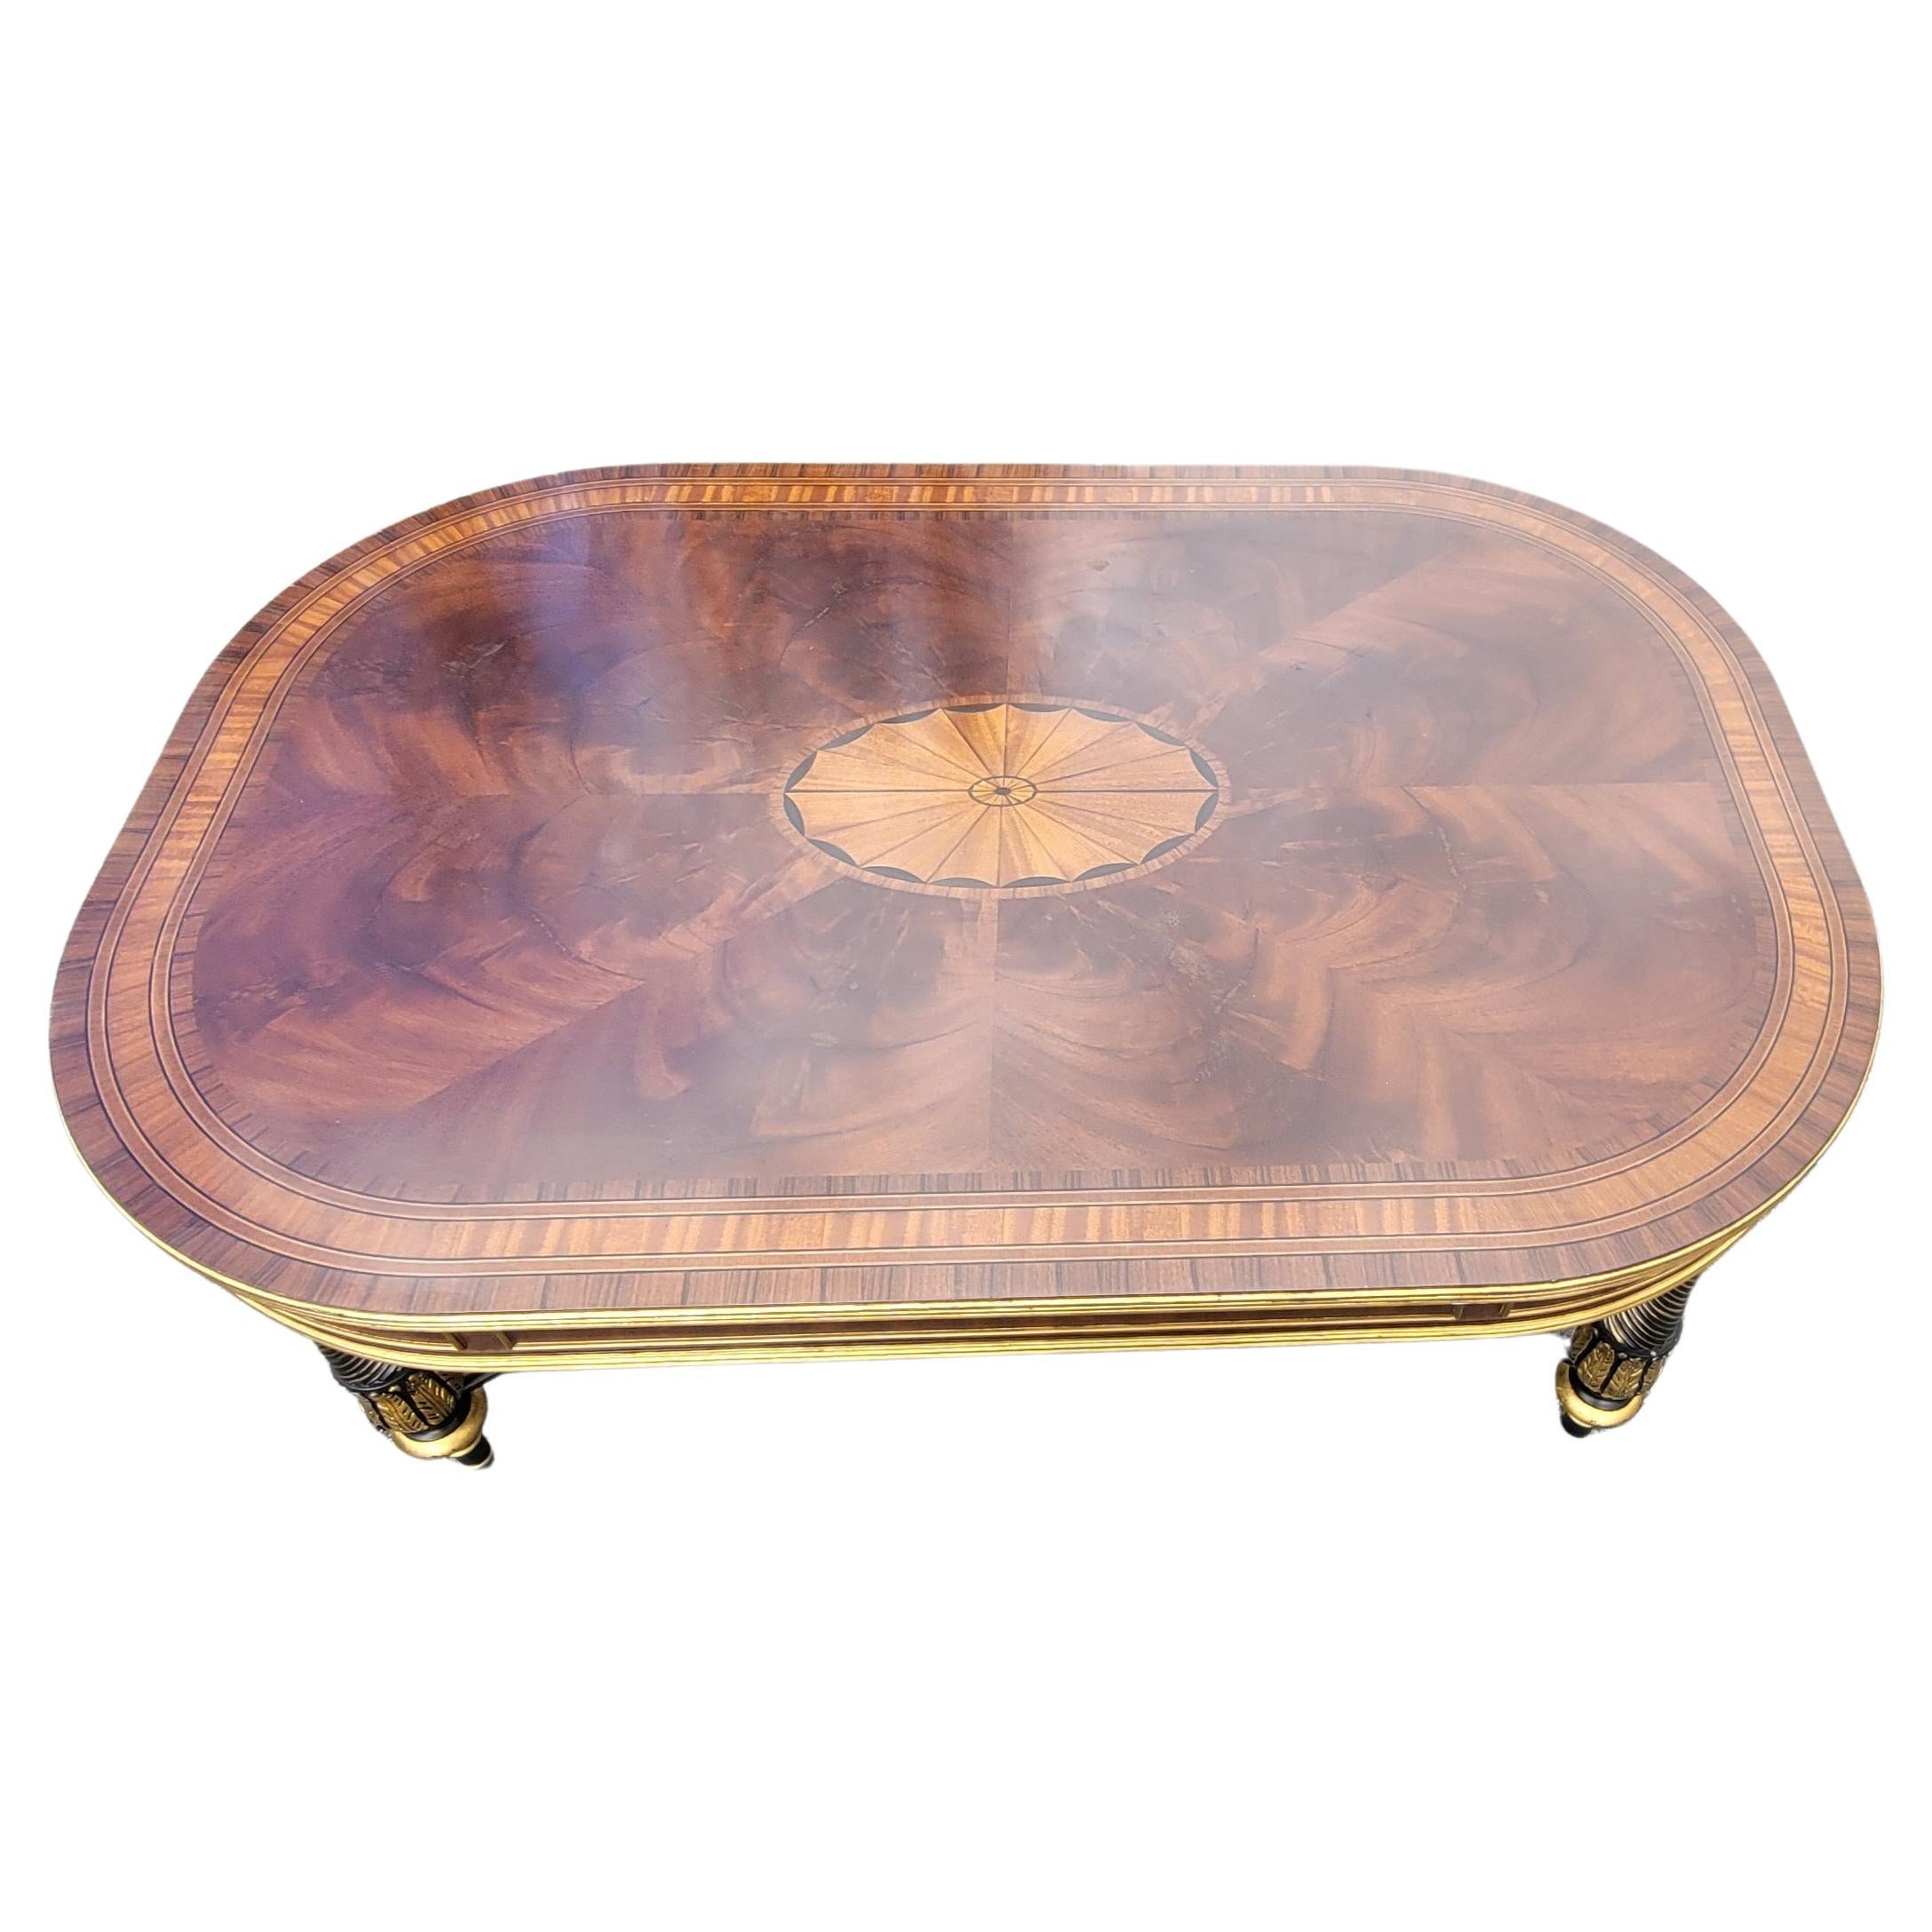 Hardwood E.J Victor Regency Style Ebonized and Parcel Gilt Marquetry Inlaid Coffee Table